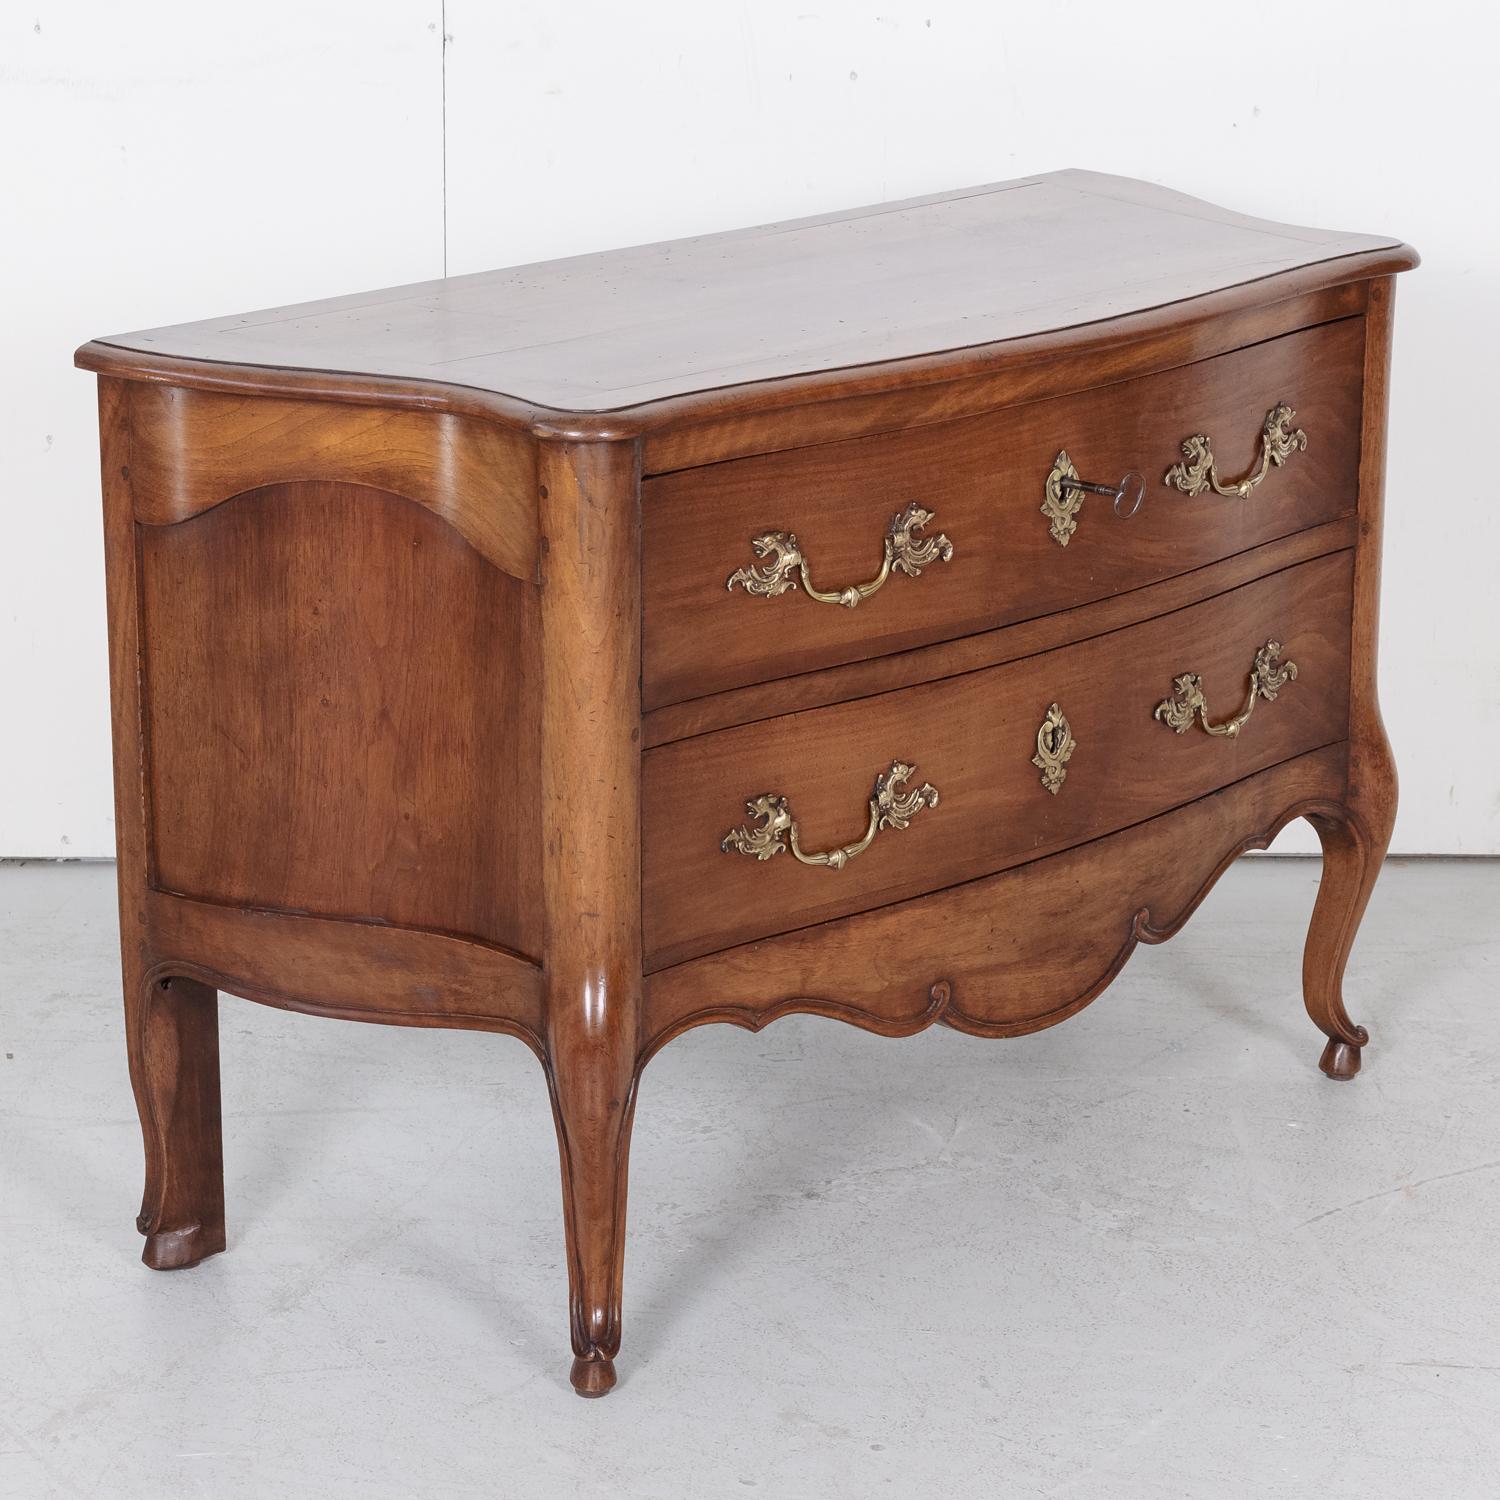 A fine 19th century French Louis XV style commode sauteuse handcrafted of solid walnut in Lyon, circa 1810. This elegant chest of drawers, also referred to as a 